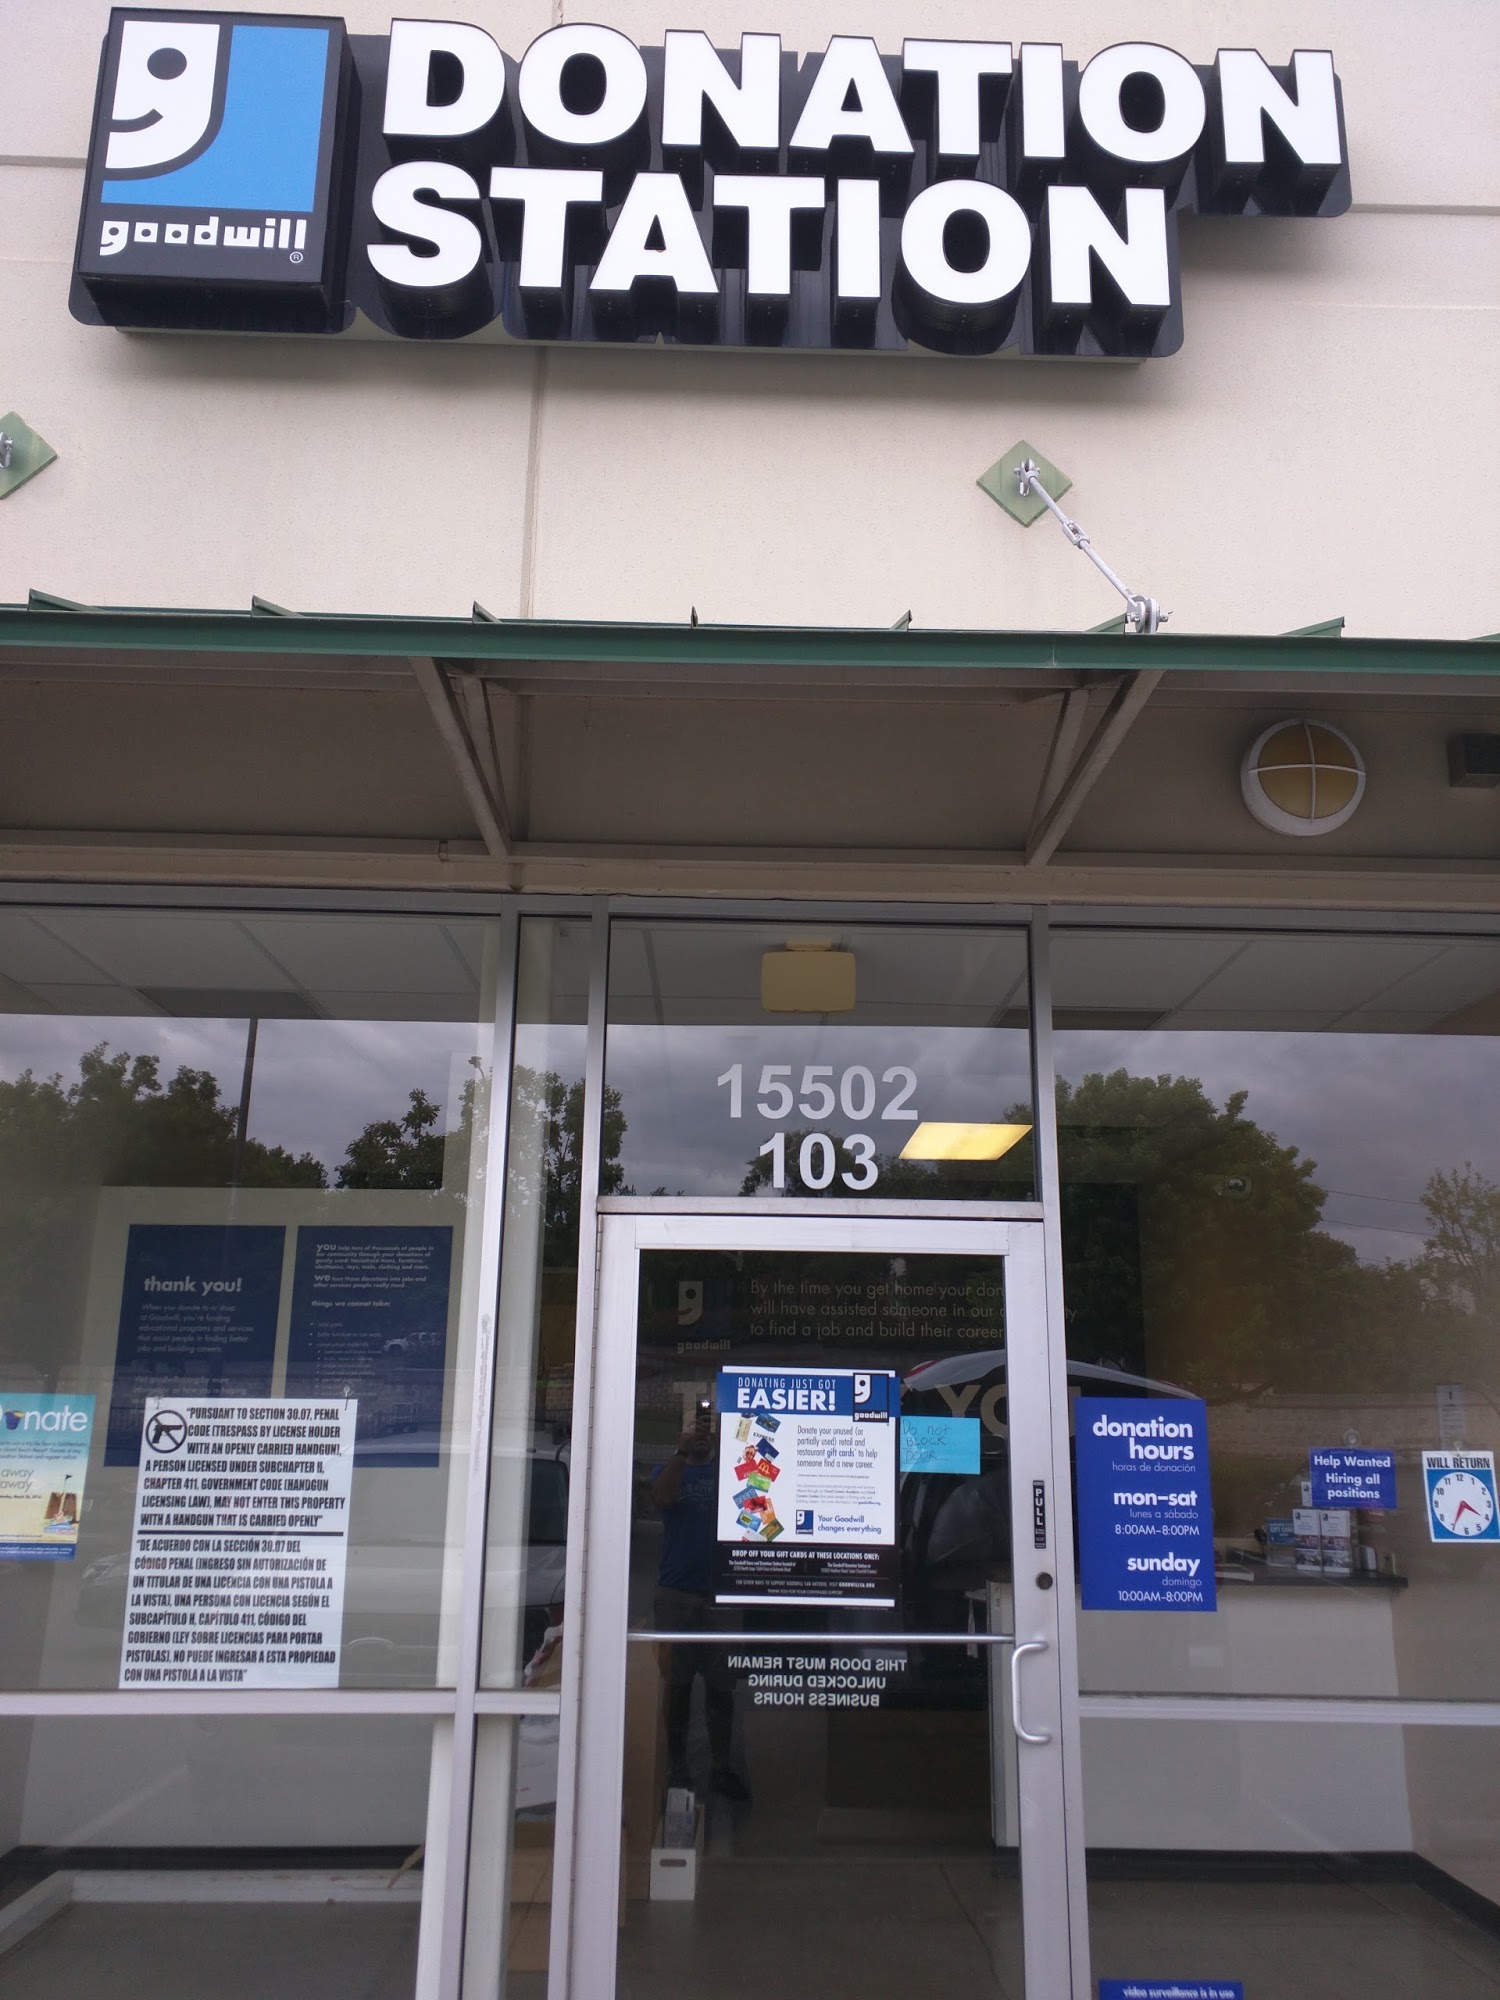 Goodwill Donation Station